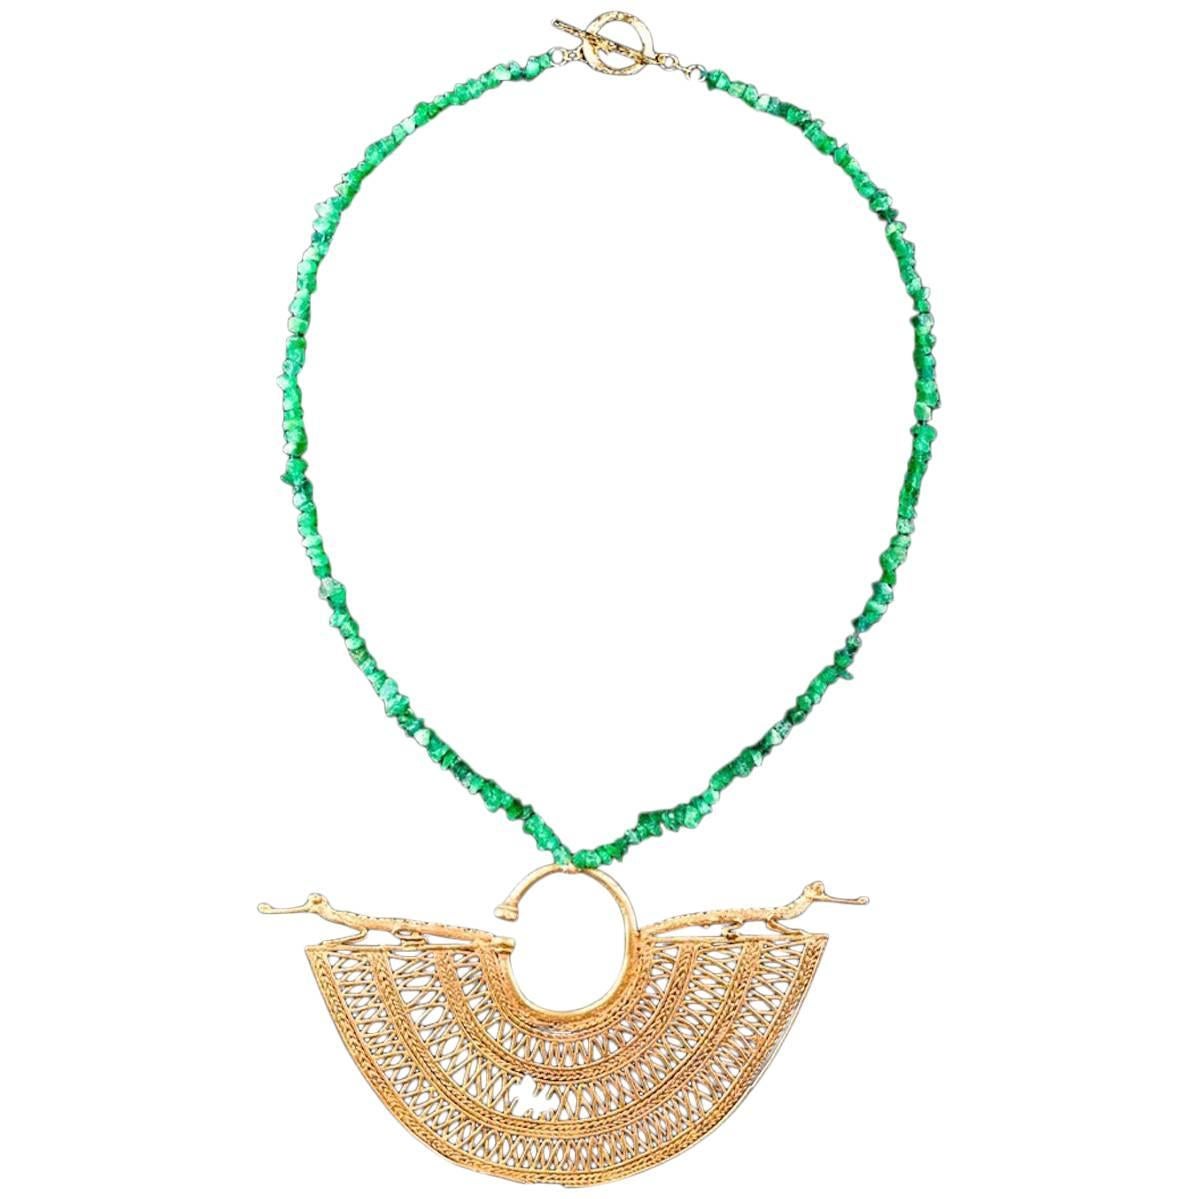 Emerald Chip Necklace with a False Filigree Earring with Caymans